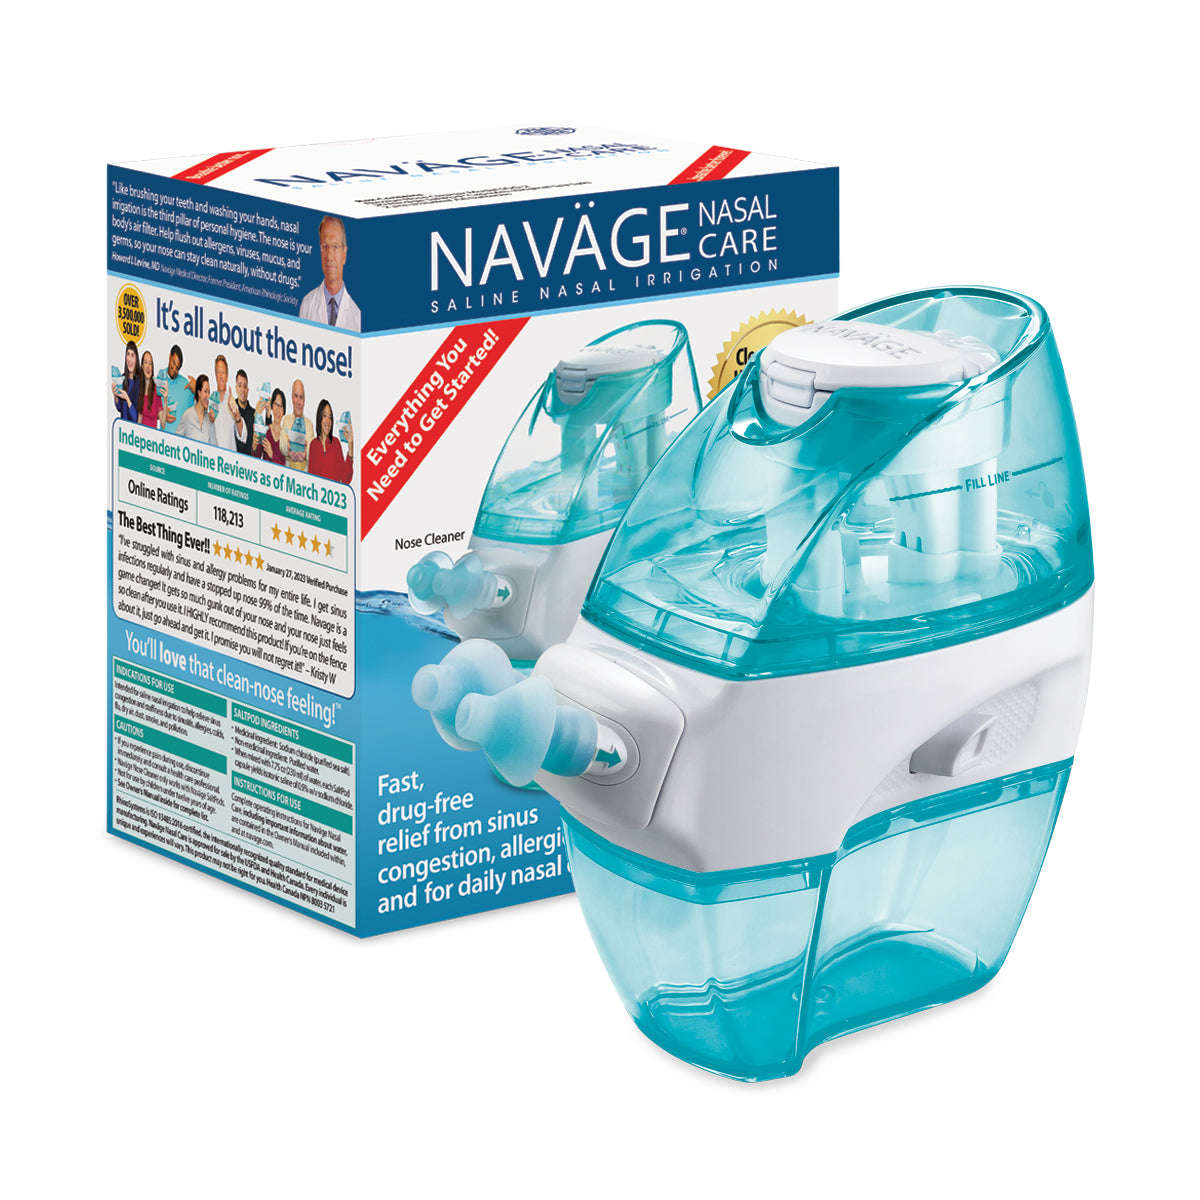 Navage Nose Cleaner - Test Out & Review 